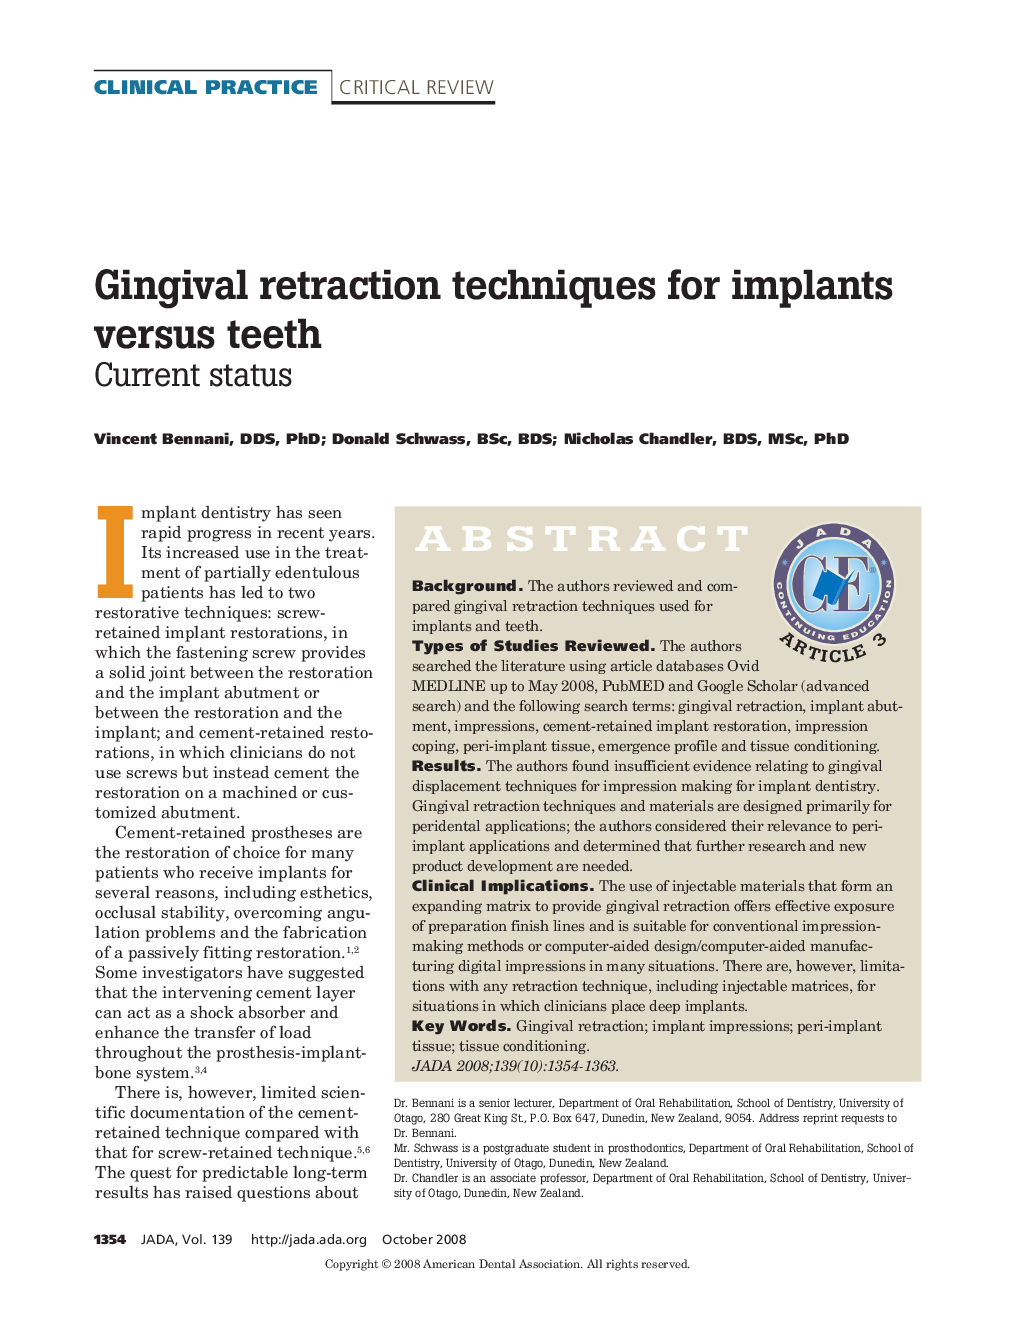 Gingival Retraction Techniques for Implants Versus Teeth : Current Status